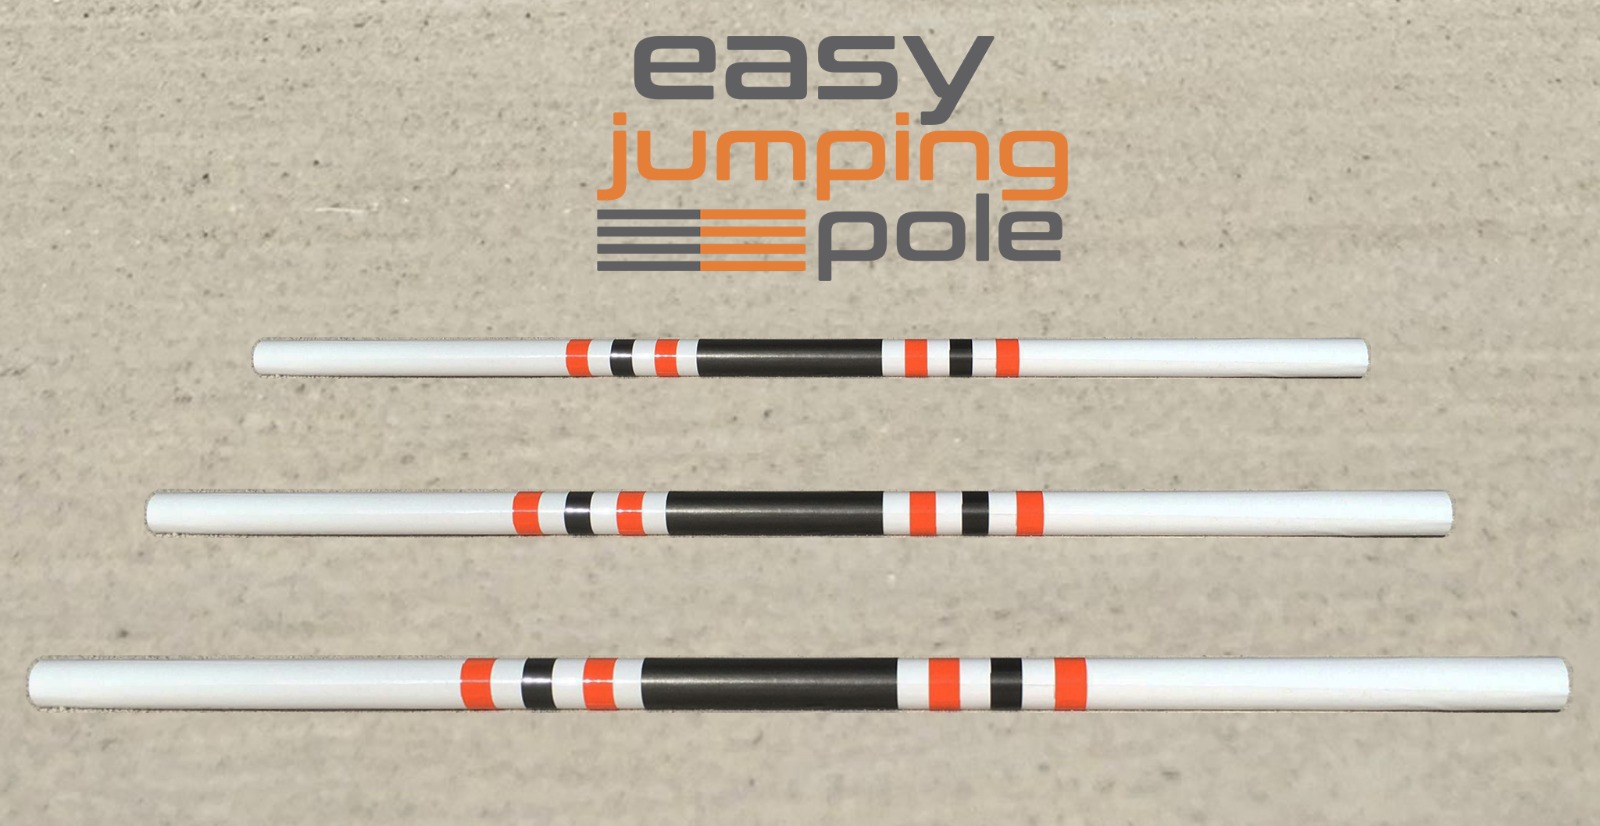 Easy jumping pole Model F-3